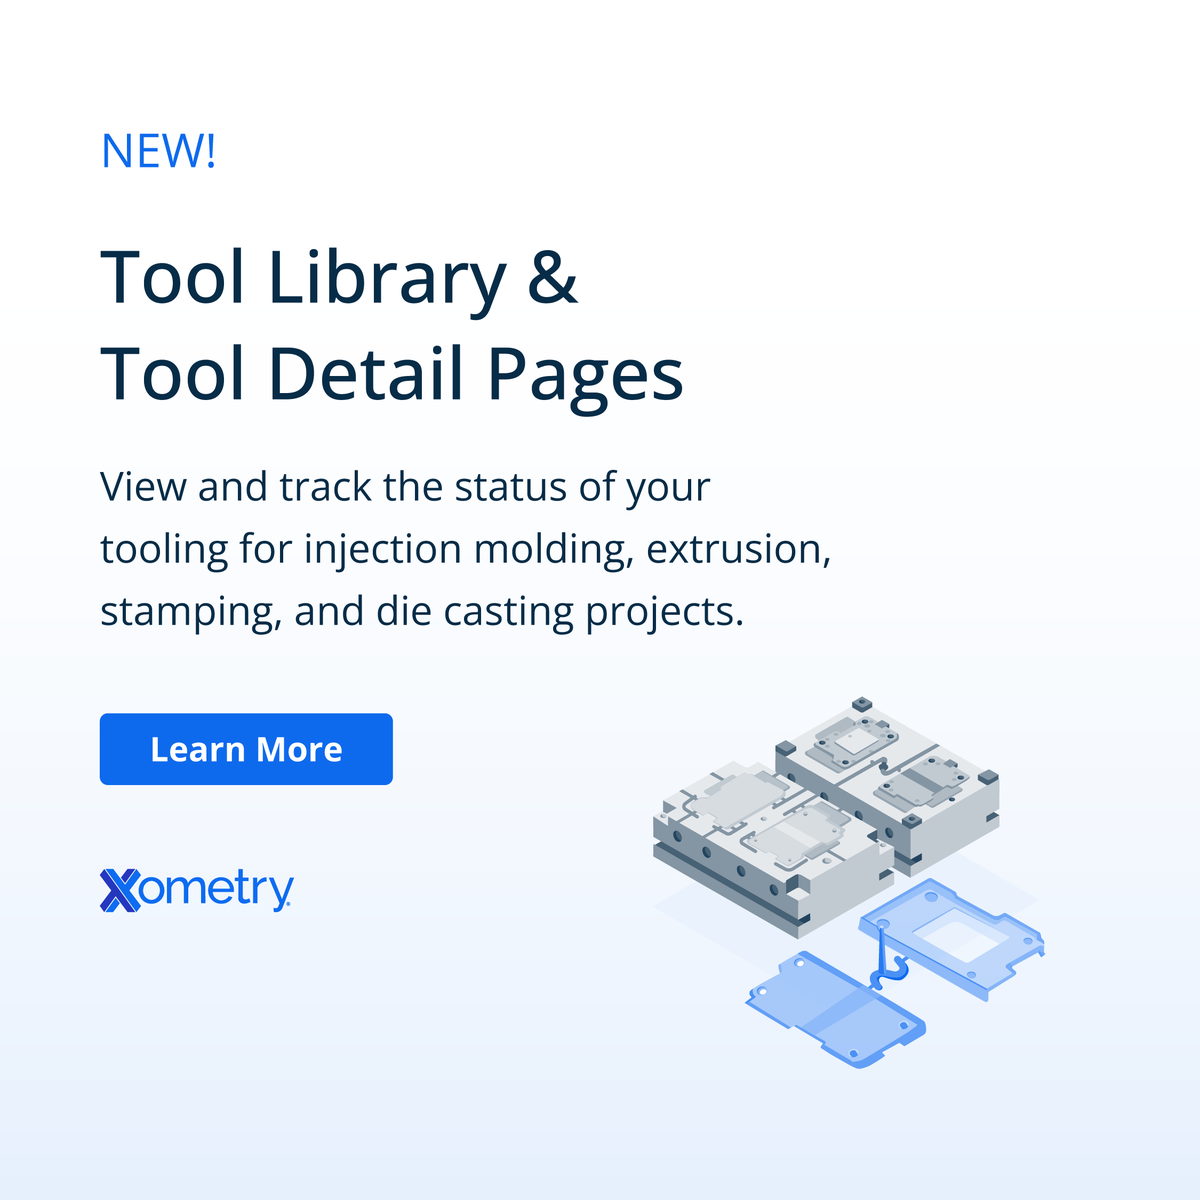 Update: Xometry recently introduced the Tool Library & Tool Details Pages, offering unprecedented visibility into tooled processes, from die casting to metal extrusion. Learn how to navigate this new feature today: loom.ly/5QuGQ-U